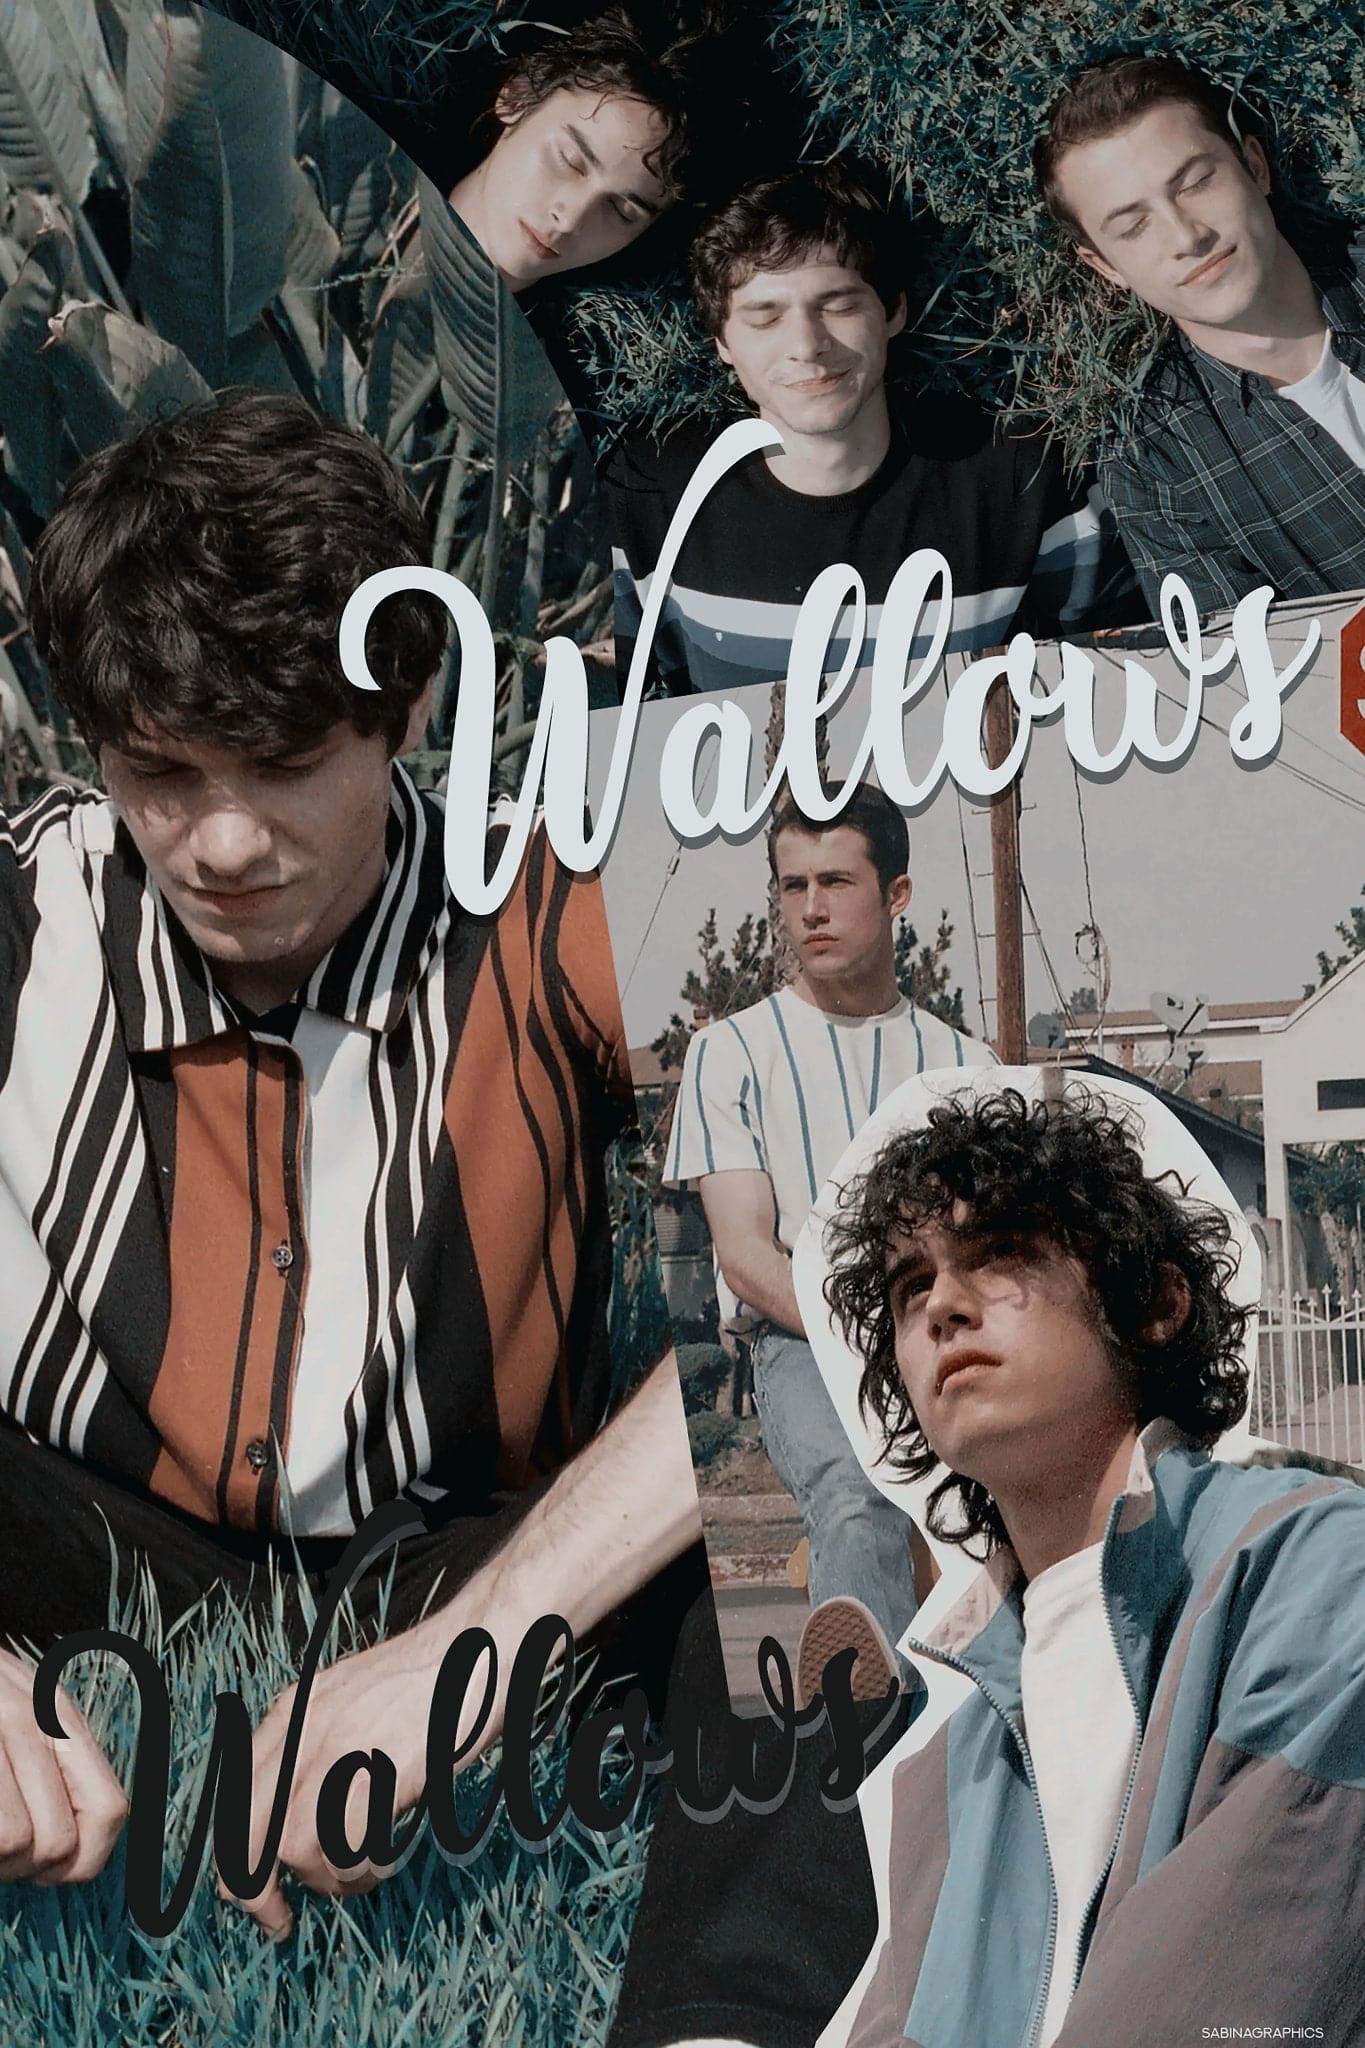 Wallows ‘Collage Style’ Poster – Posters Plug